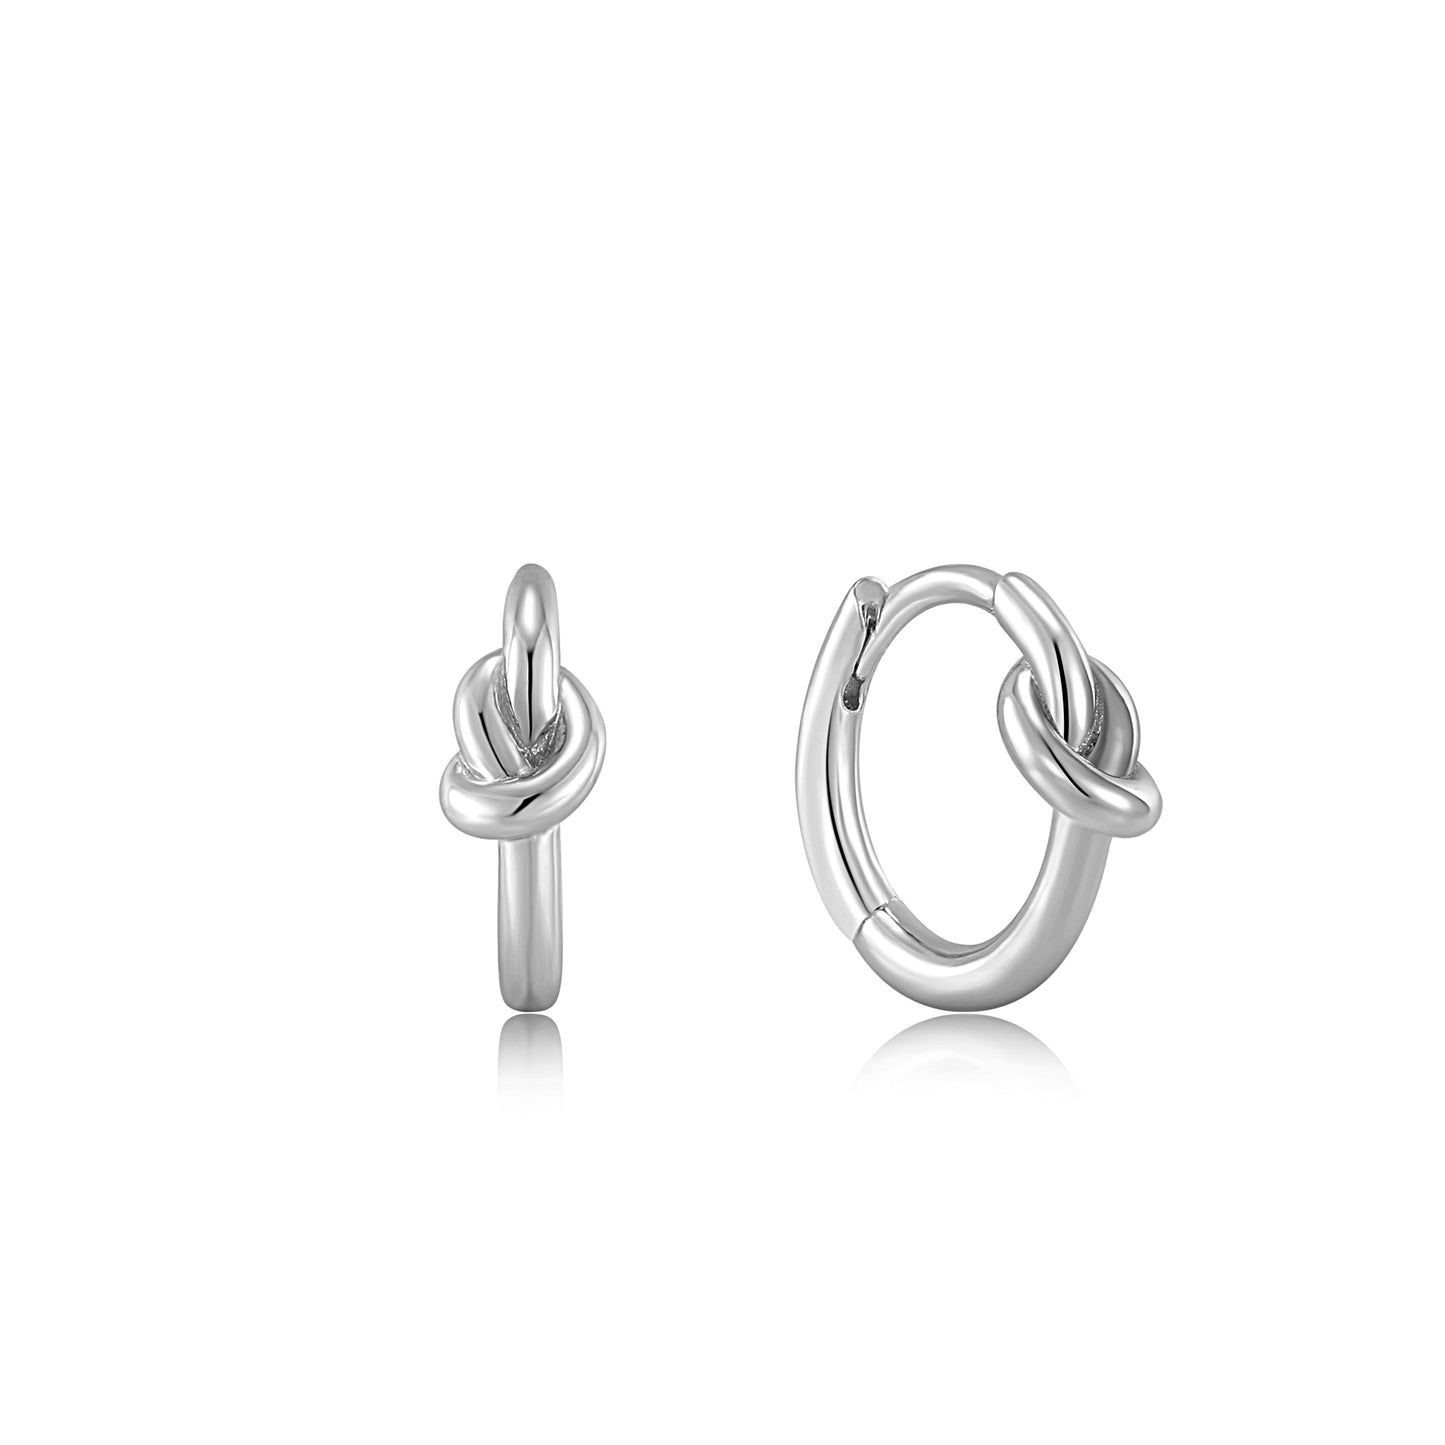 ANIA HAIE ANIA HAIE - Silver  Knot Huggie Hoop Earrings available at The Good Life Boutique